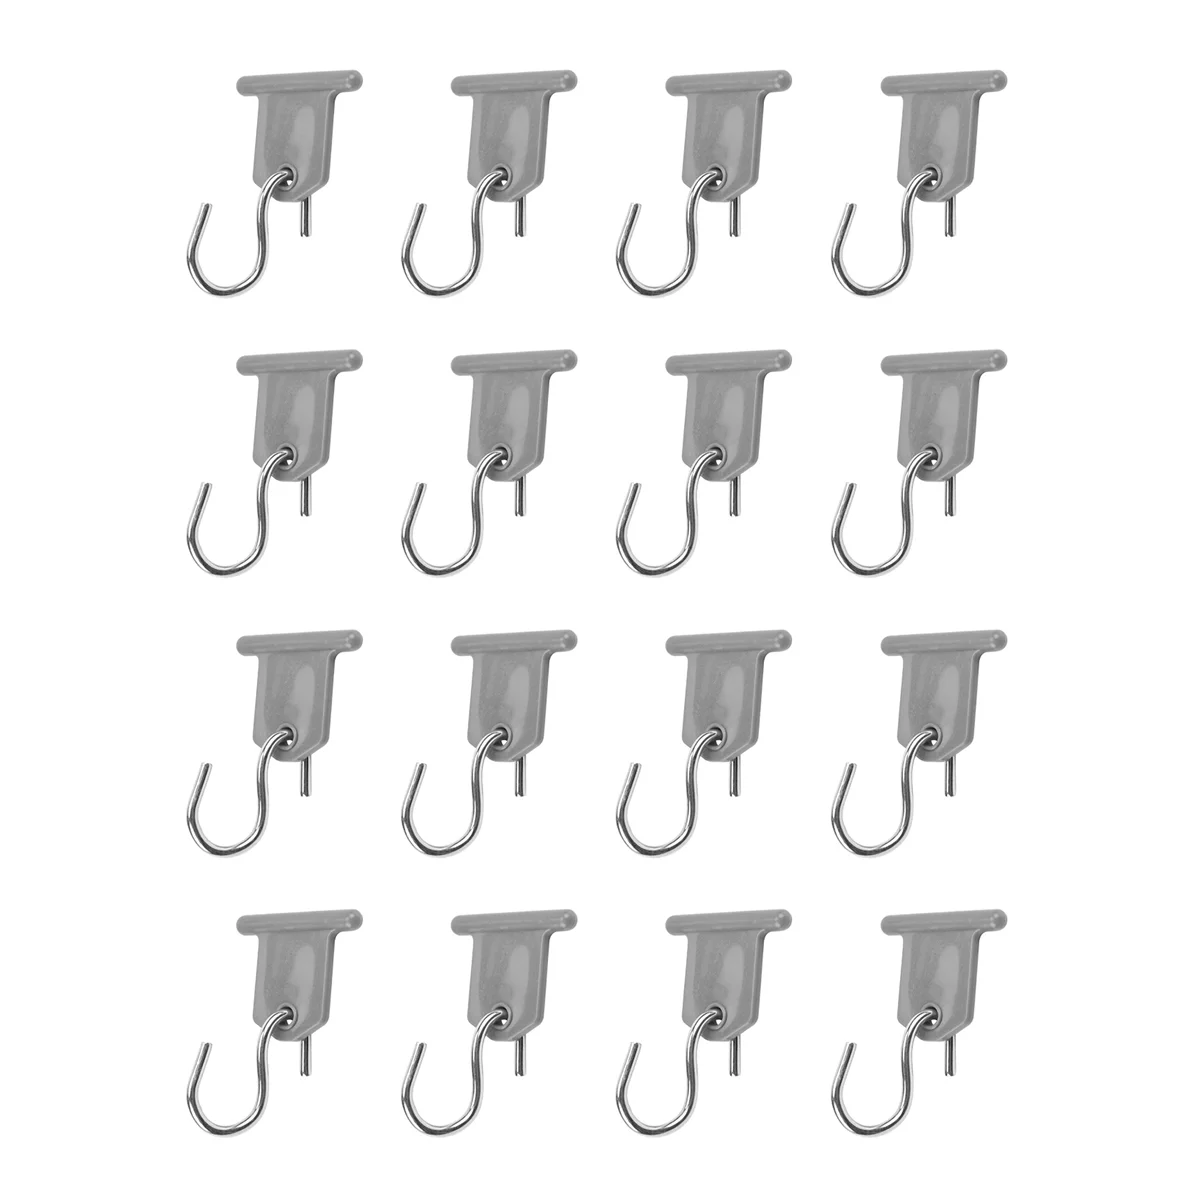 

12PCS Camping Awning Hooks RV Awning Hangers Hooks RV Party Light Hangers for Christmas Party Caravan Travel Trailer